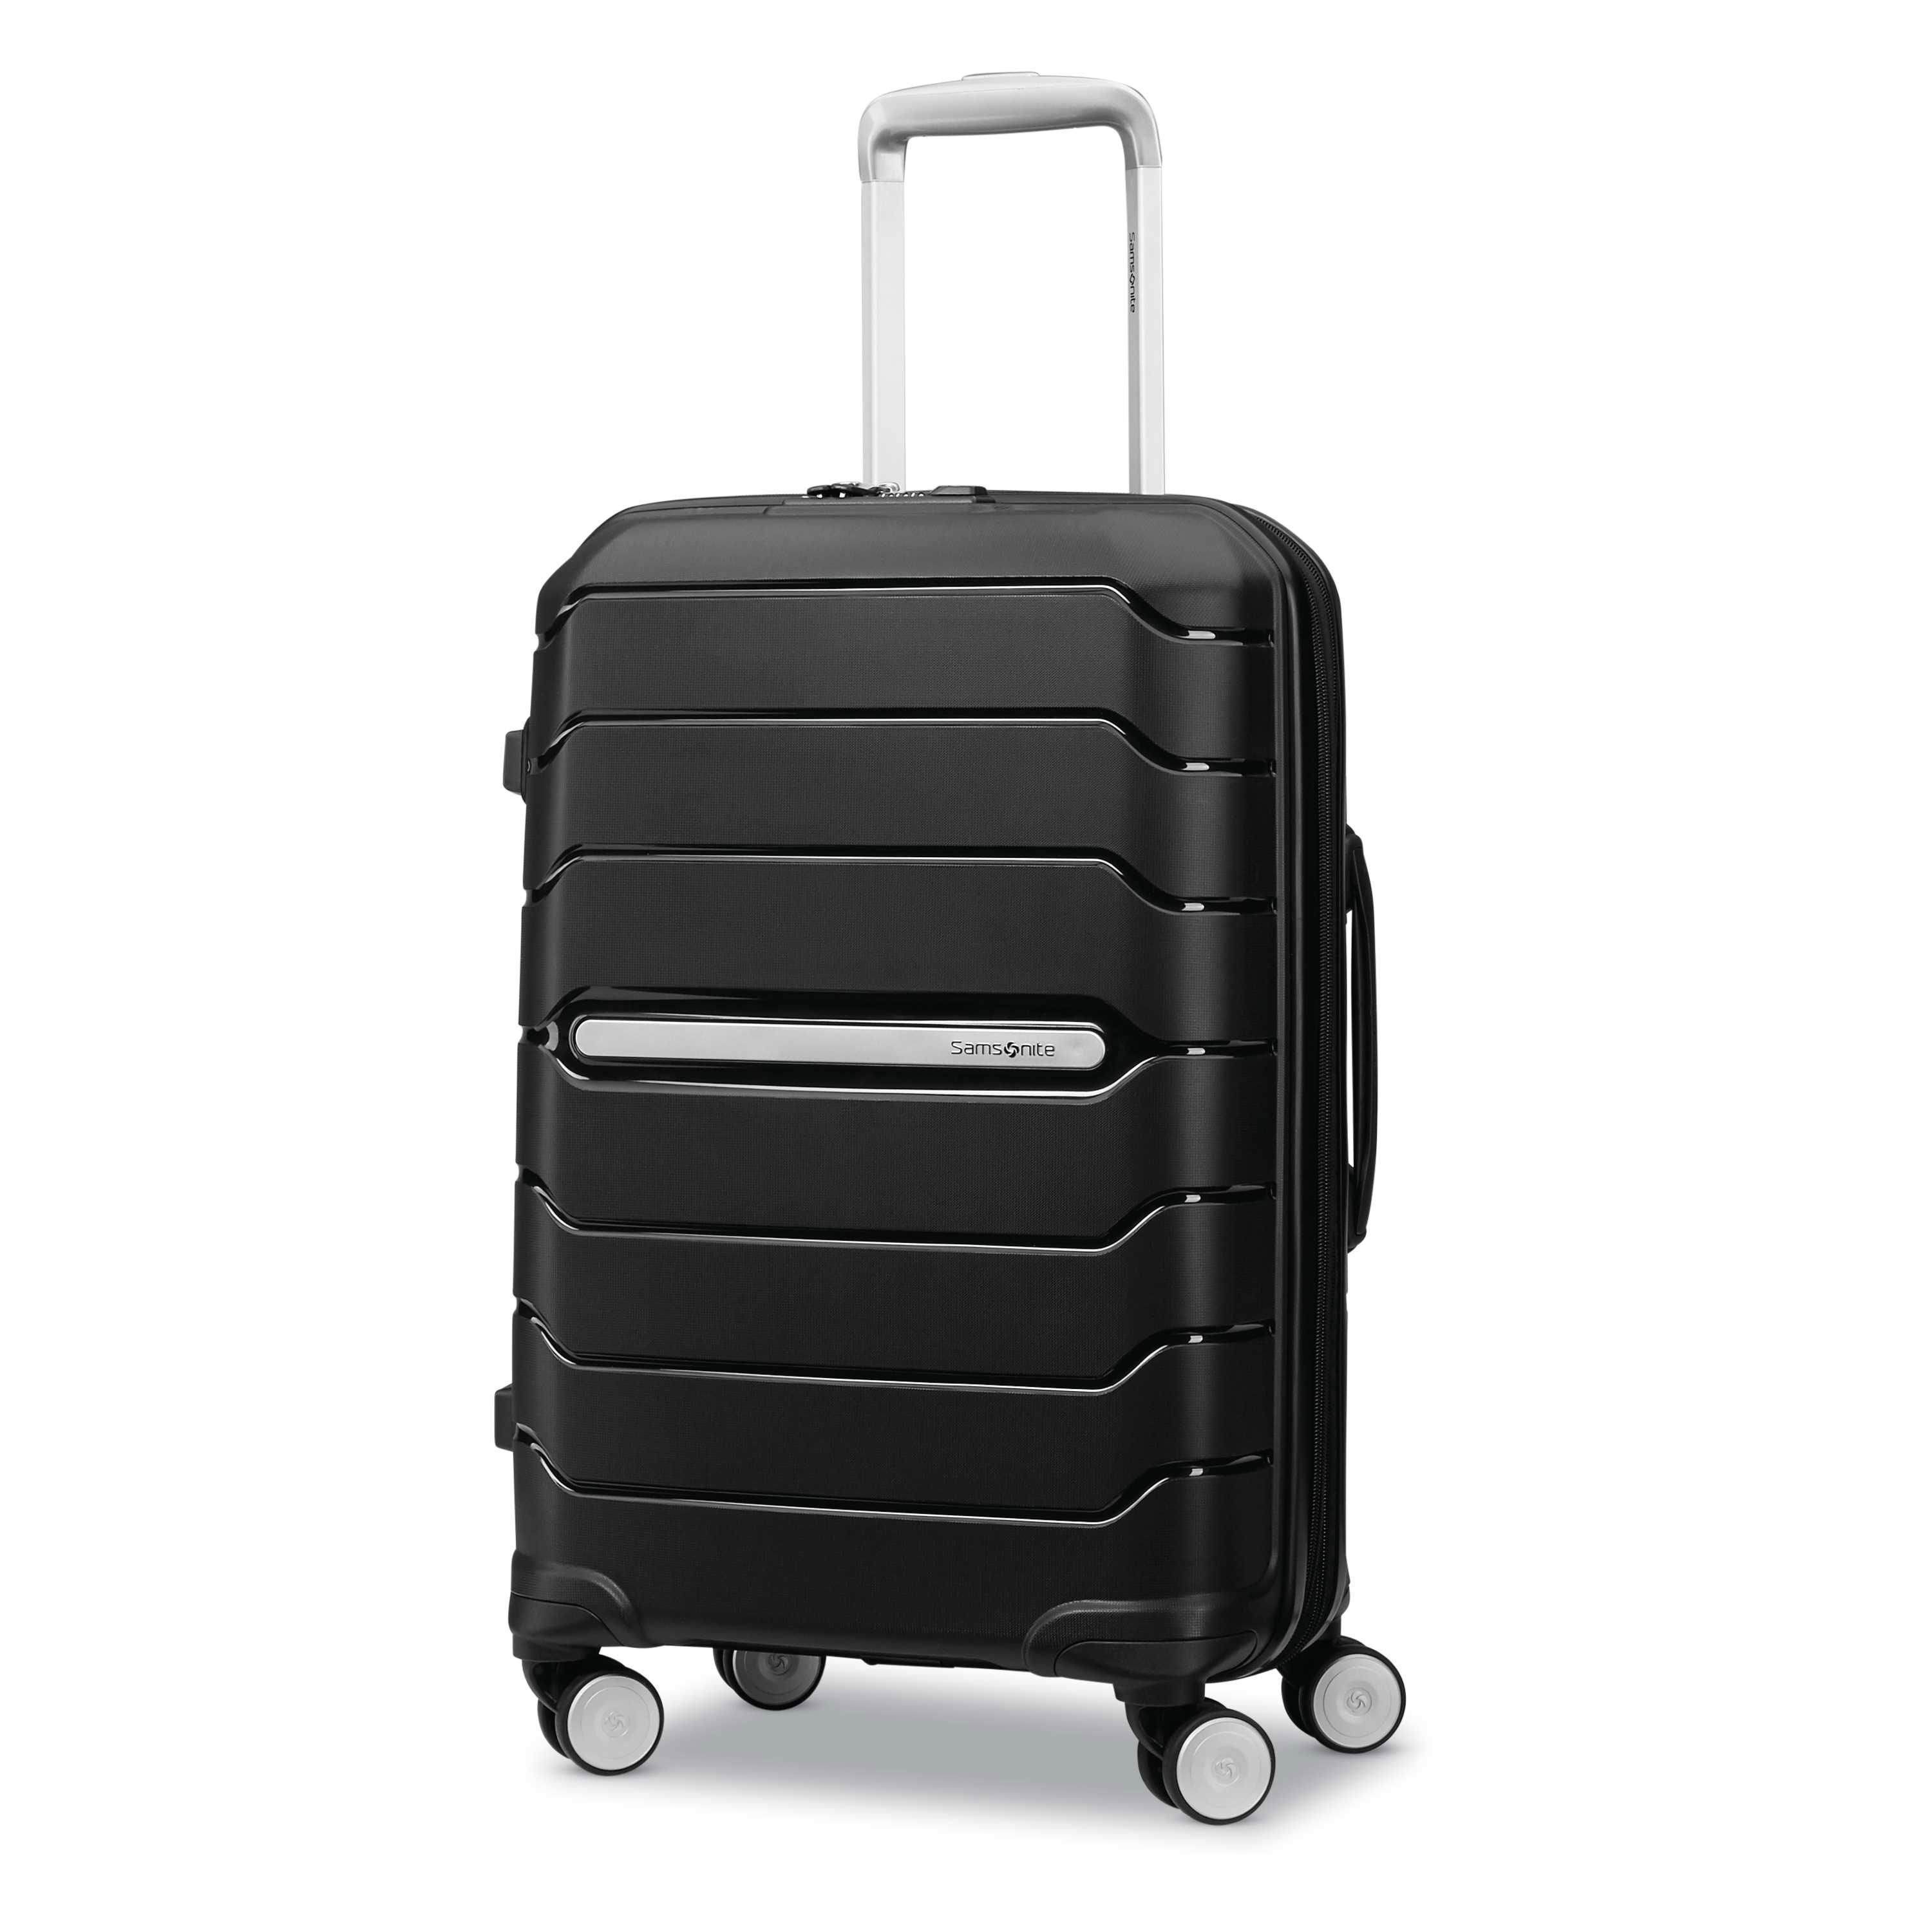 <p><strong>$159.99</strong></p><p><a href="https://shop.samsonite.com/luggage/carry-on-luggage/freeform-carry-on-spinner/78255XXXX.html">Shop Now</a></p><p>Samsonite luggage is the GH Institute's pick for the best overall luggage brand because of its wide selection of options for business travelers, vacationers and families alike. In testing over the years, we've found Samsonite's products to be long-lasting, versatile and easy to organize, offering a similar quality of luxury luggage brands at a much lower price. During the brand's sitewide sale, you can take <strong>up to 20% off </strong><strong>everything</strong>, including popular hard-sided and soft-sided styles. </p><p><strong>Our favorite deal: </strong> <strong>Save 20% </strong>on the <a href="https://shop.samsonite.com/luggage/carry-on-luggage/freeform-carry-on-spinner/78255XXXX.html">Freeform Carry-On Spinner</a> for a limited time. This budget-friendly carry-on also made the GH Institute's list of the <a href="https://www.goodhousekeeping.com/travel-products/luggage-reviews/g39955373/best-hard-side-case-luggage/">best hard-sided luggage</a> because of how easy it is to open and close, its rotatable wheels and its durable exterior. </p>